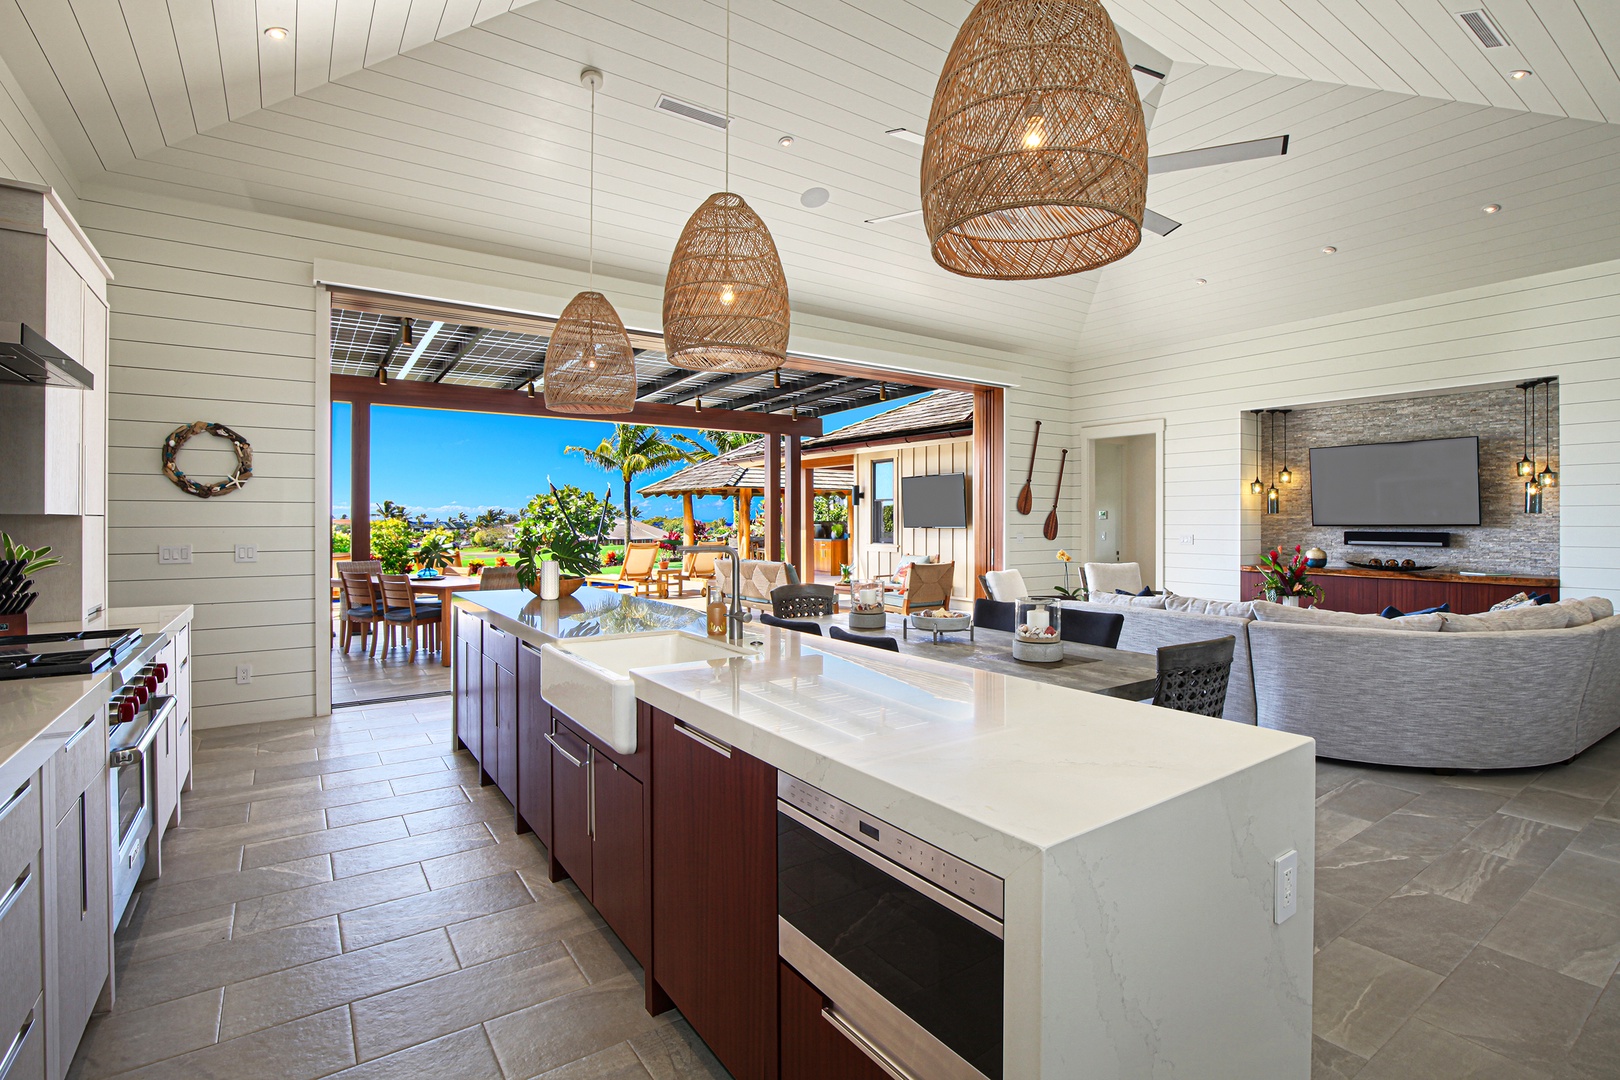 Koloa Vacation Rentals, OFB Hale Mala Ulu - Open kitchen where to cook all your favorite meals